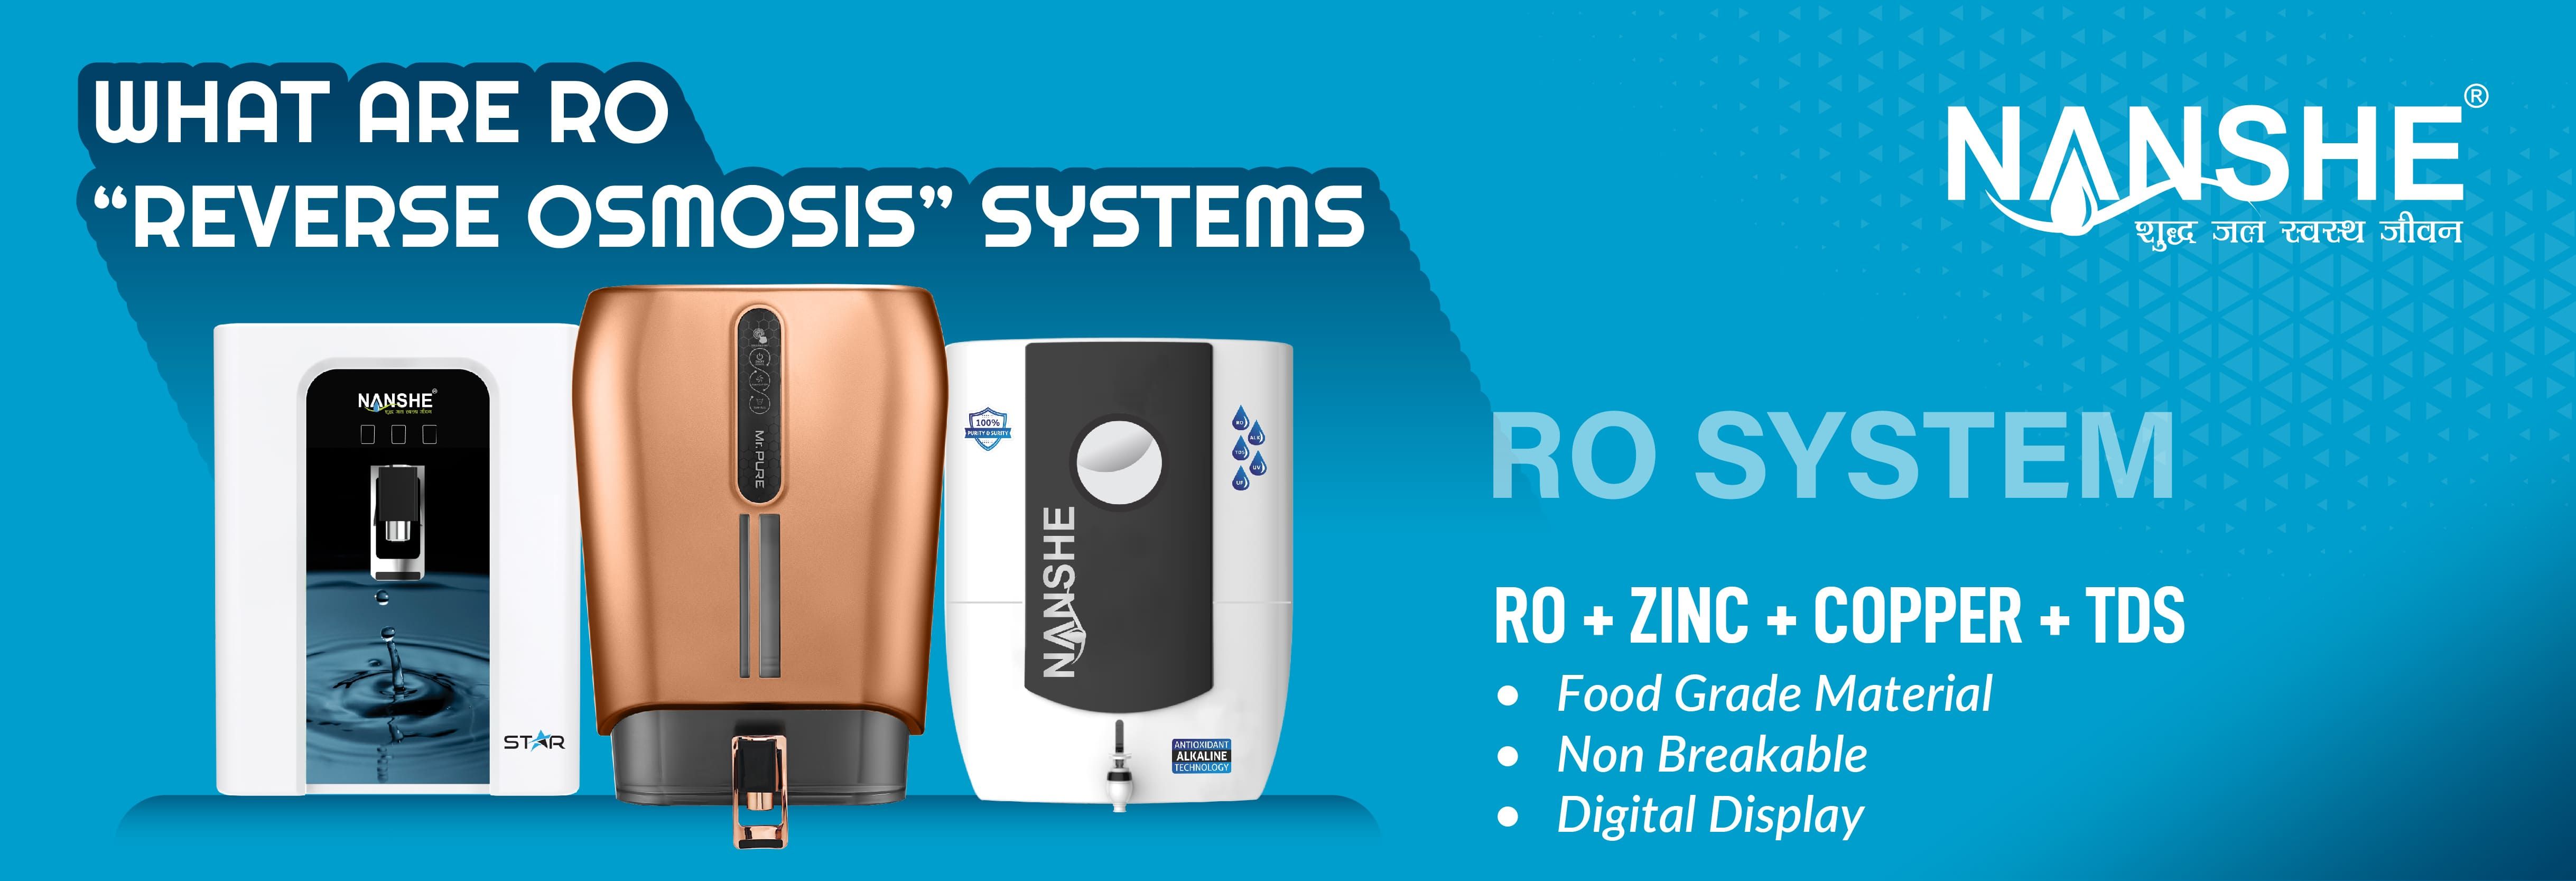 WHAT ARE RO
“REVERSE OSMOSIS” SYSTEMS

NANSHE

RO SYSTEM

RO + ZINC + COPPER + TDS
eo Food Grade Material

e Non Breakable

e Digital Display